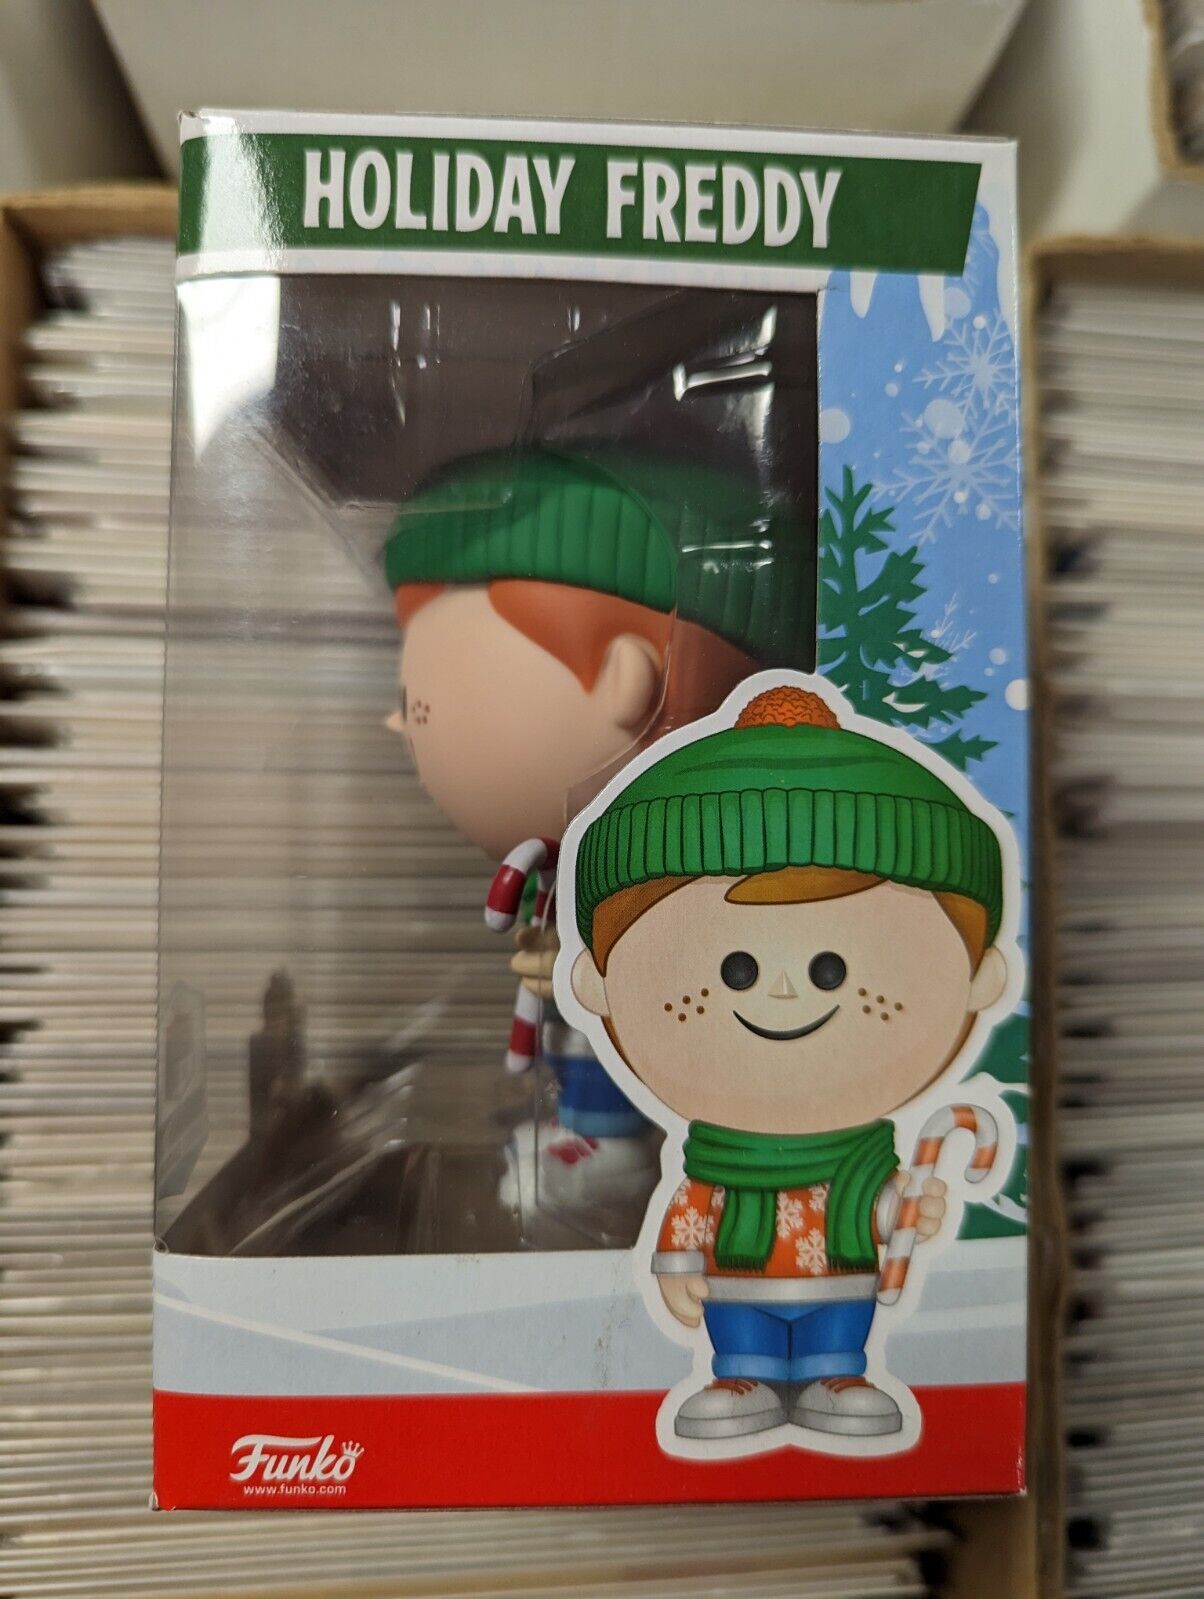 Funko HQ Exclusive Holiday Freddy 12 Says Of Funko